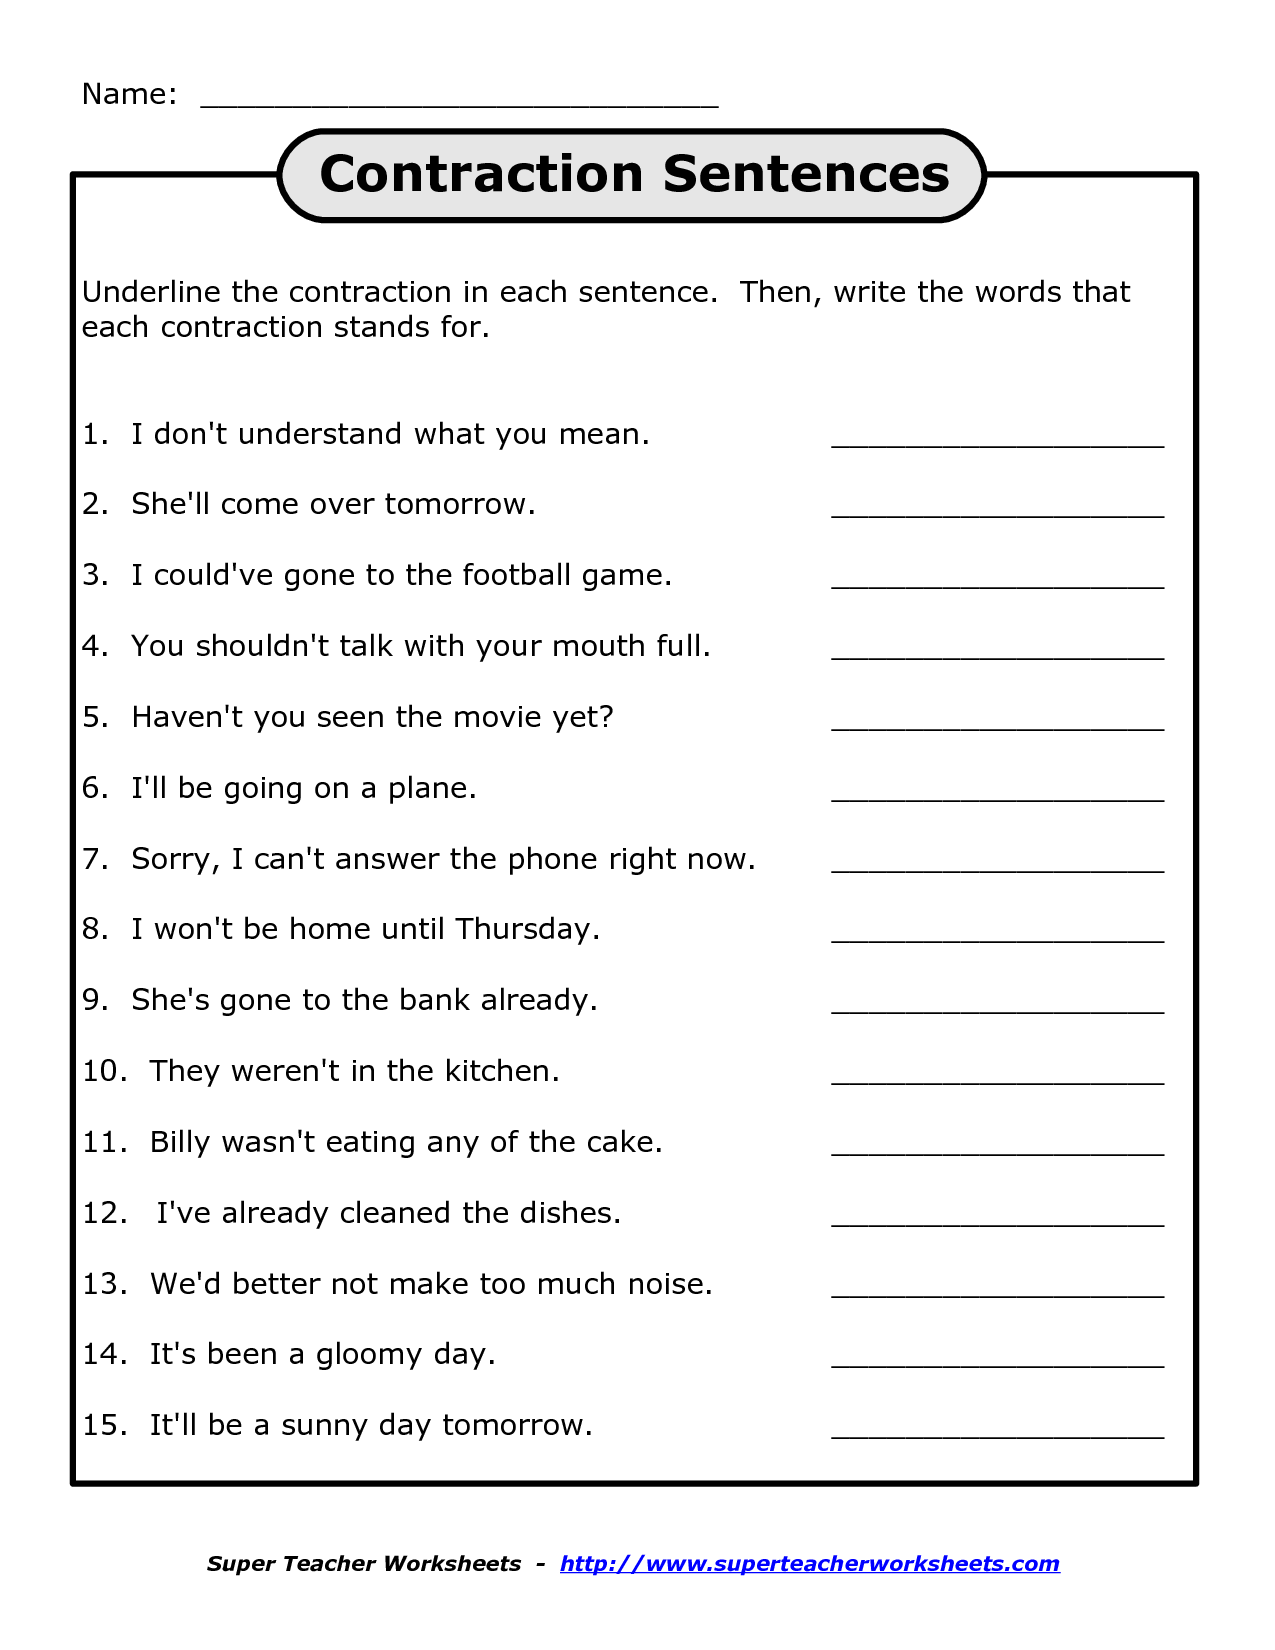 using-contractions-in-sentences-worksheet-free-download-goodimg-co